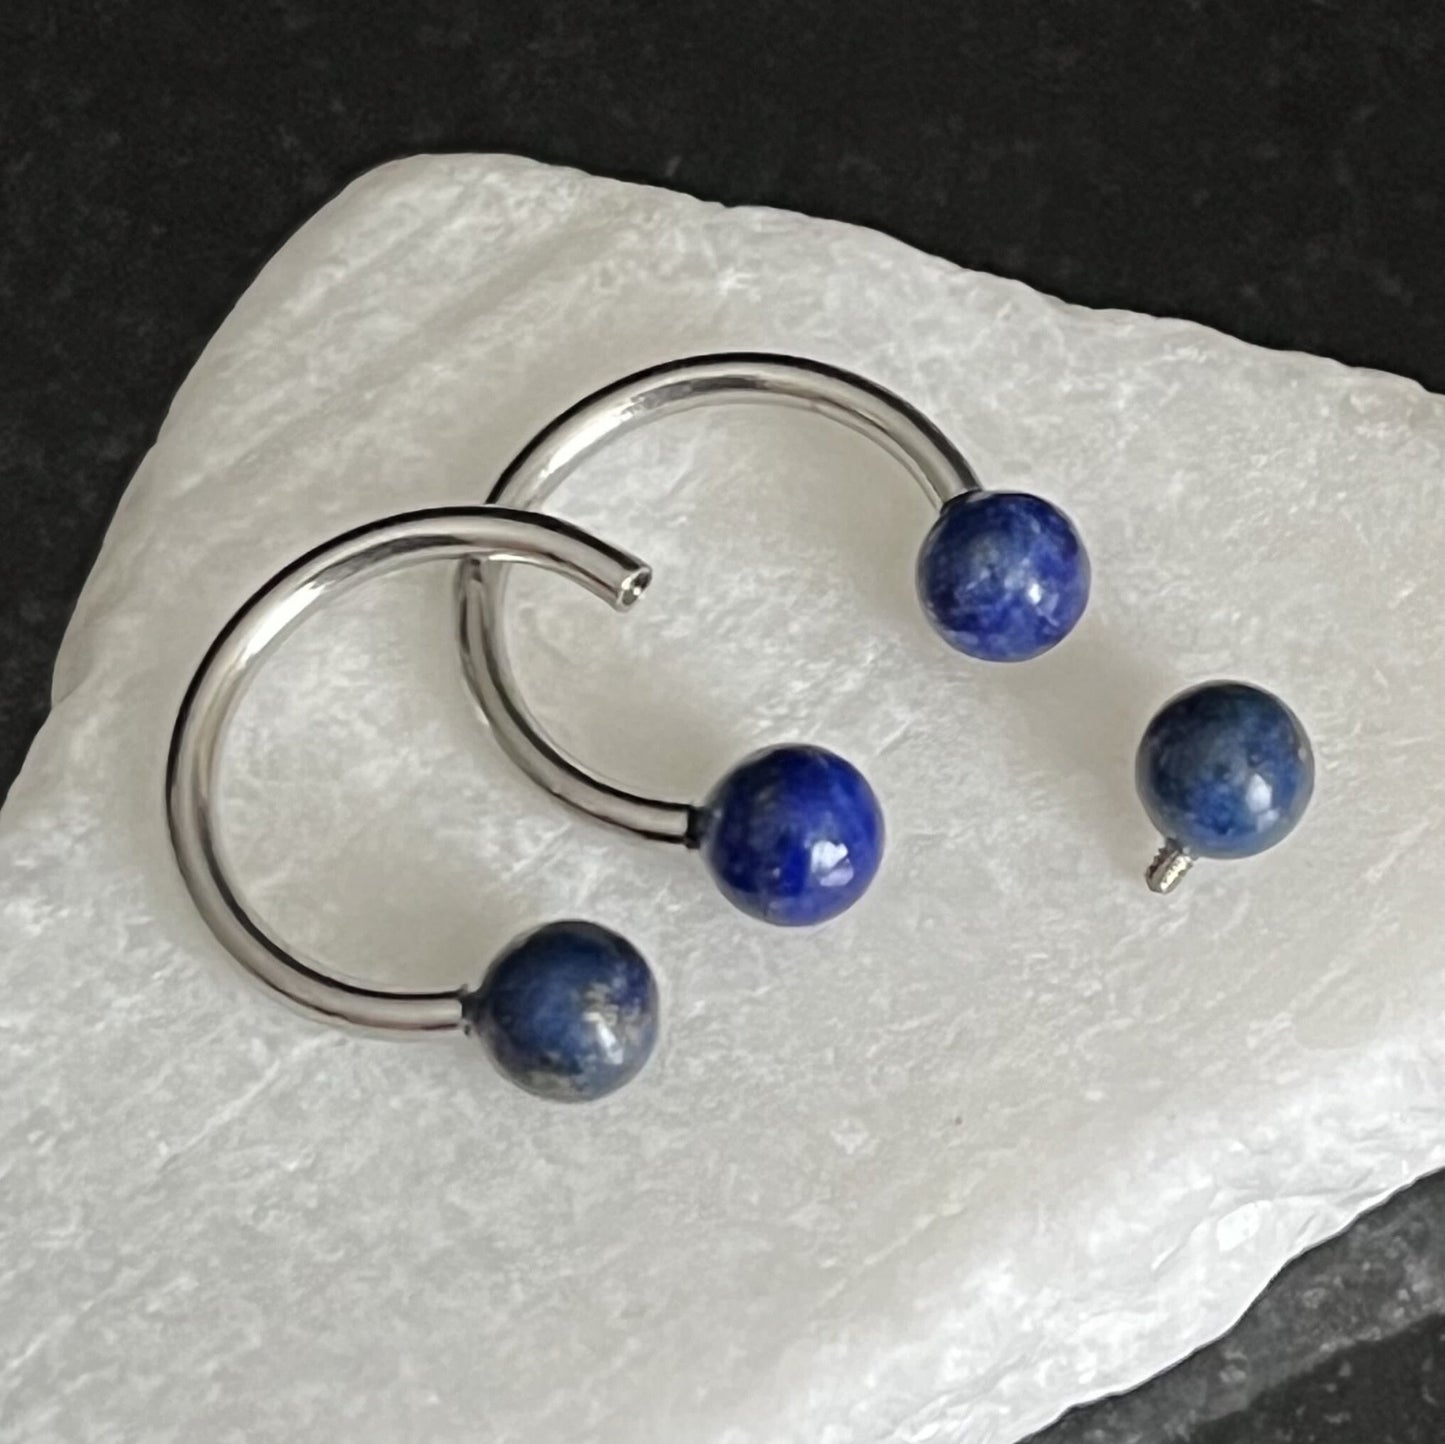 1 Piece of Stunning Semi Precious Stone Circular Internally Threaded Barbell Septum Ring - 16g - 8mm - You Choose Your Listed Stone!